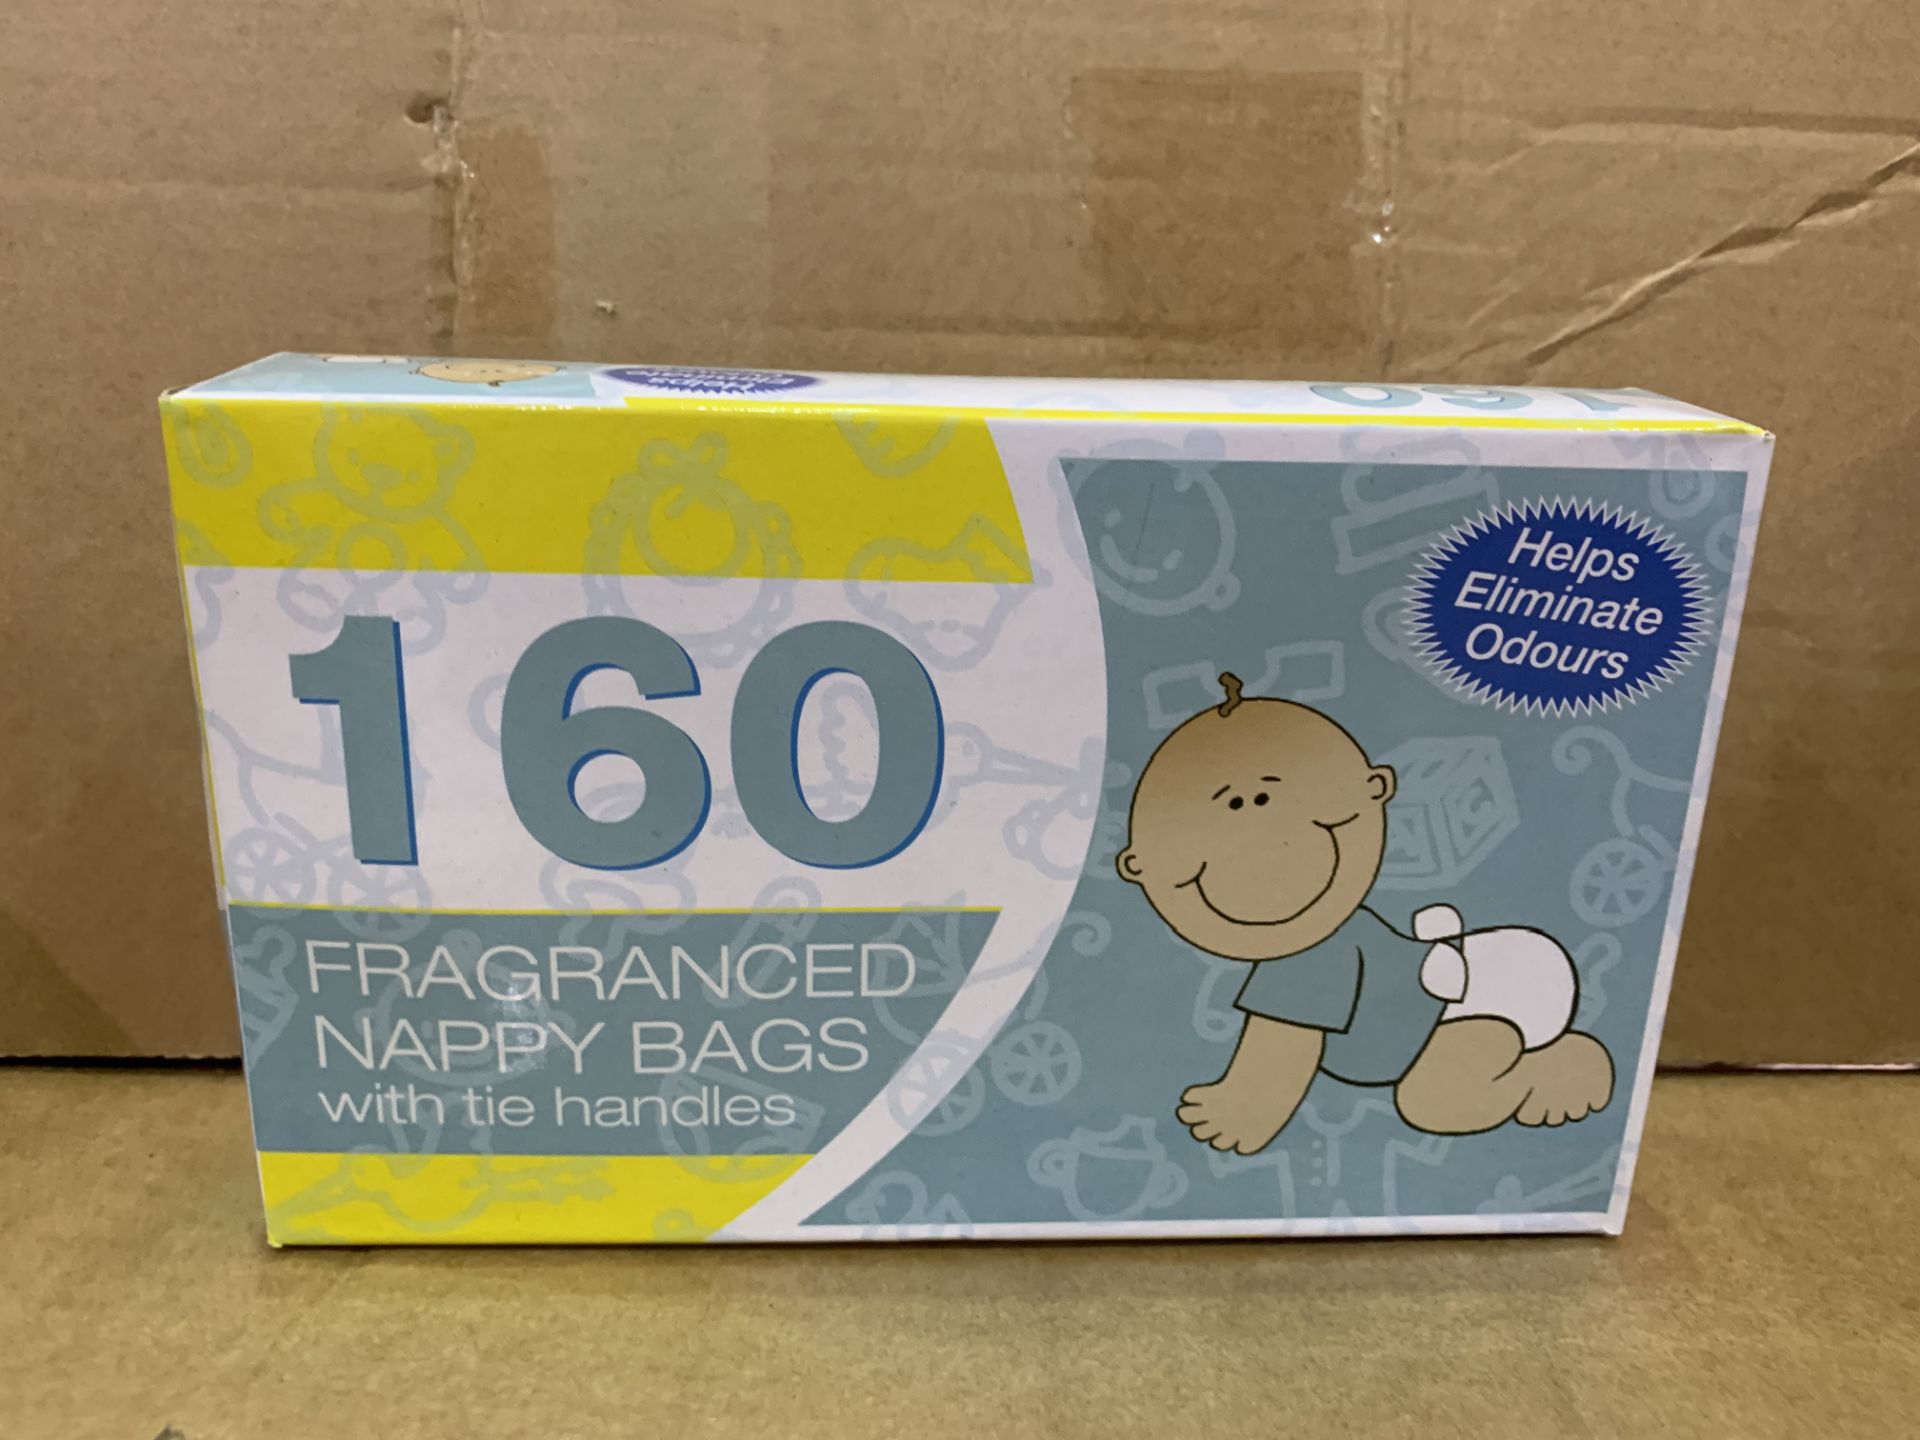 43 X BRAND NEW PACKS OF 160 FRAGRANCED NAPPY BAGS WITH TIE HANDLES